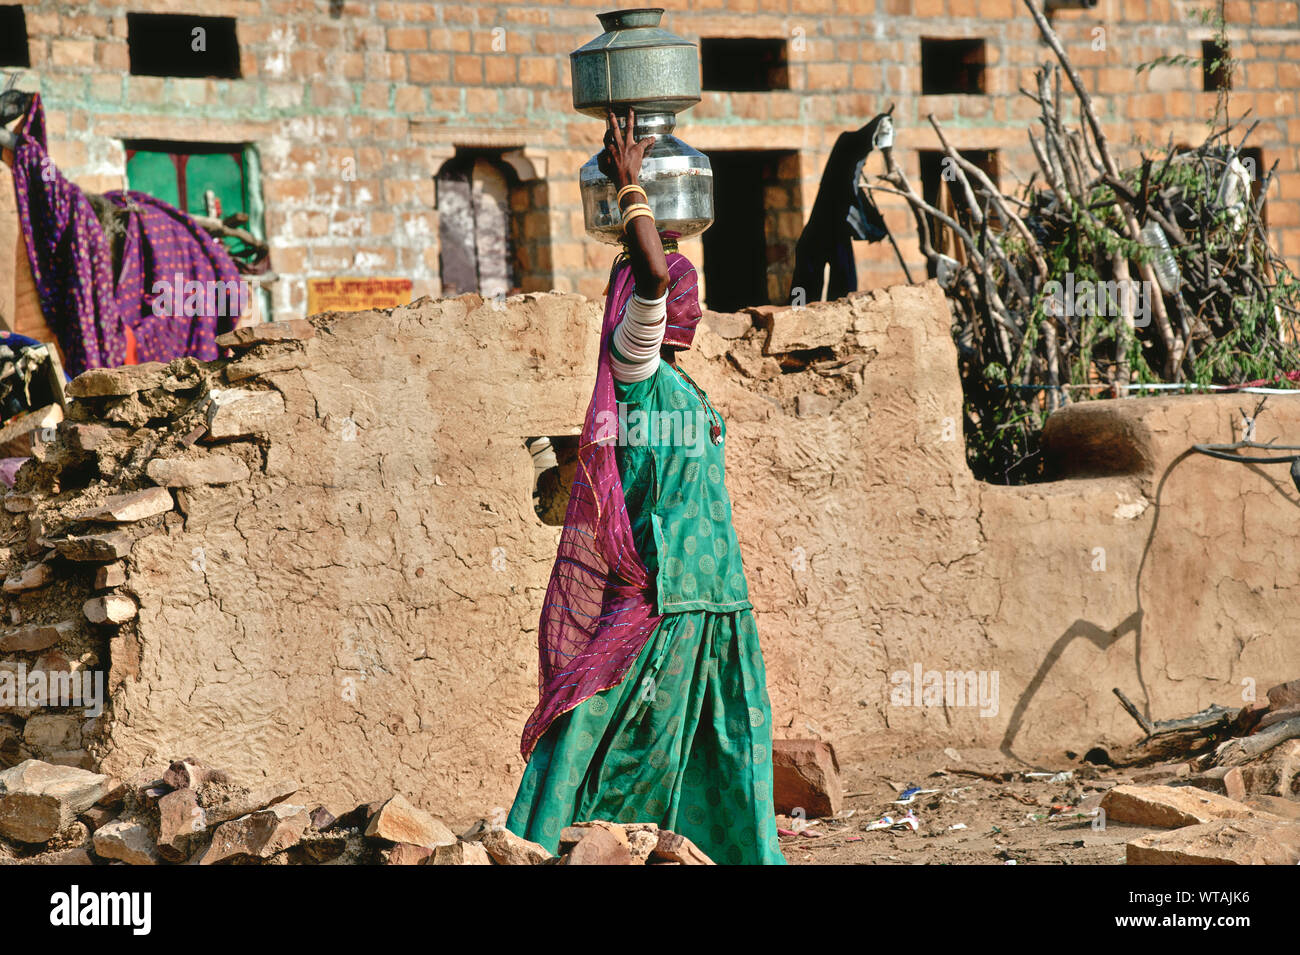 Rajasthani carrying water jars in the head in a Thar Desert village Stock Photo